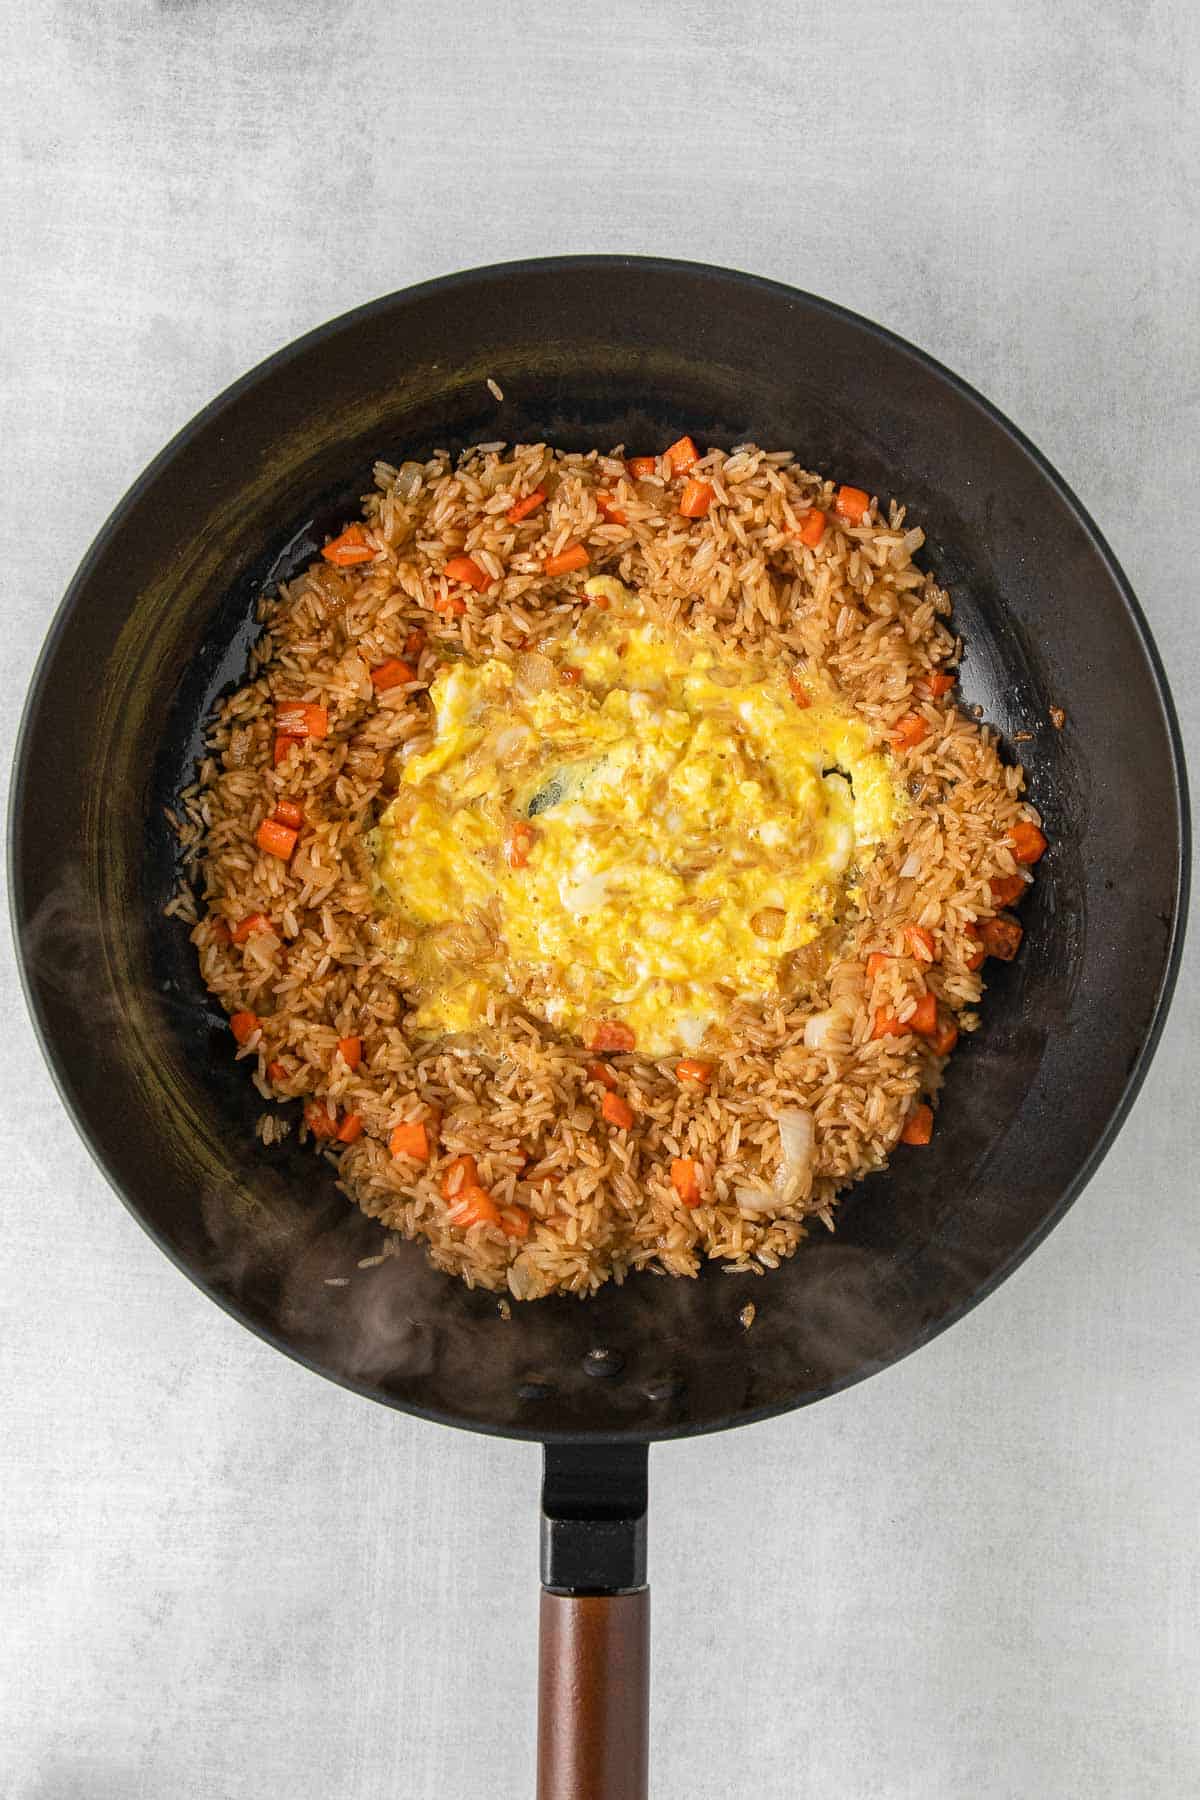 Large black skillet with beaten egg added to center of rice mixture.